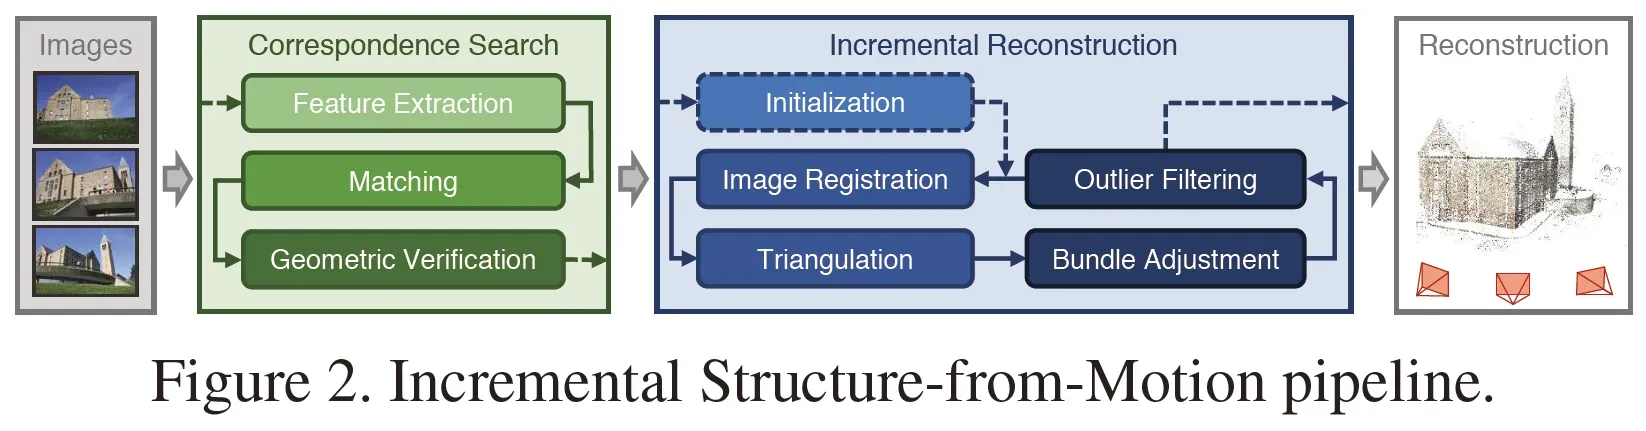 Colmap论文——《Structure-from-Motion Revisited》论文阅读笔记